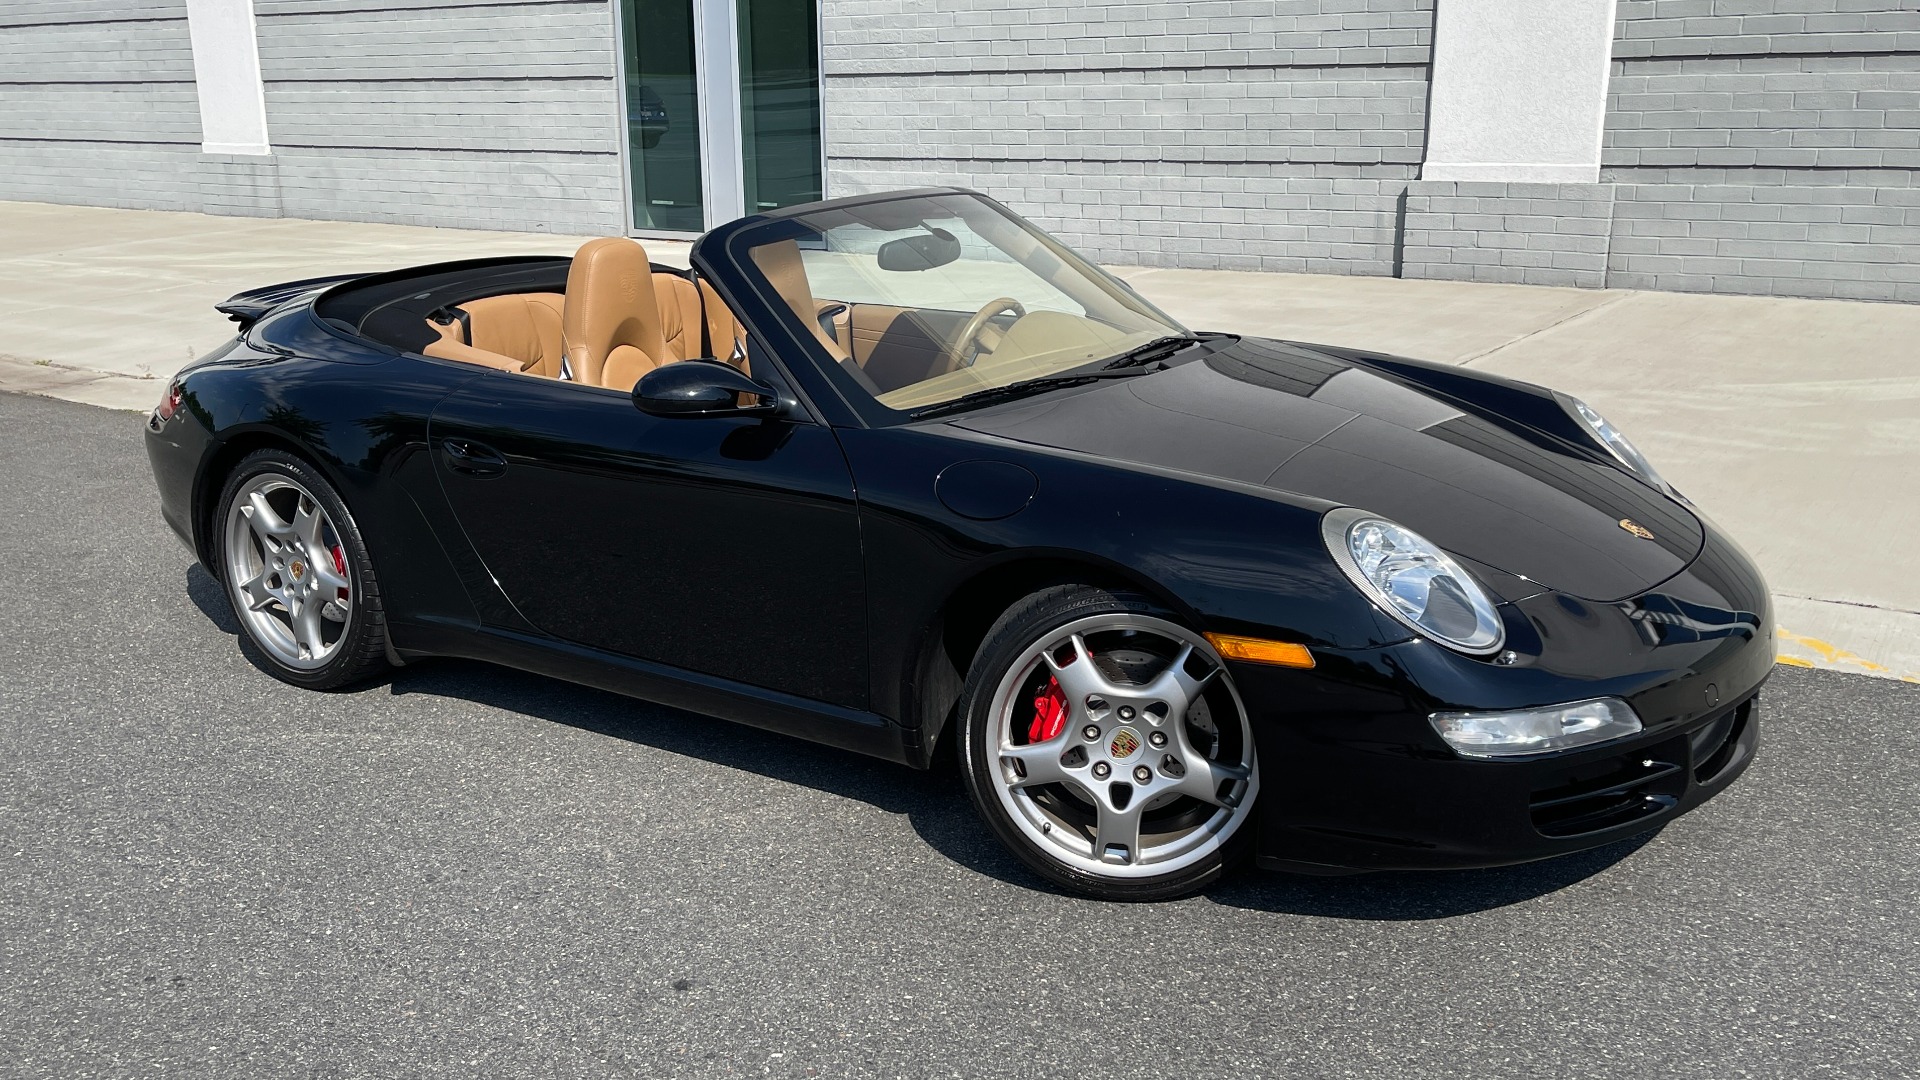 Used 2006 Porsche 911 CARRERA S CABRIOLET / BOSE / CD CHANGER / PWR SEAT PKG / HTD STS for sale $56,400 at Formula Imports in Charlotte NC 28227 6